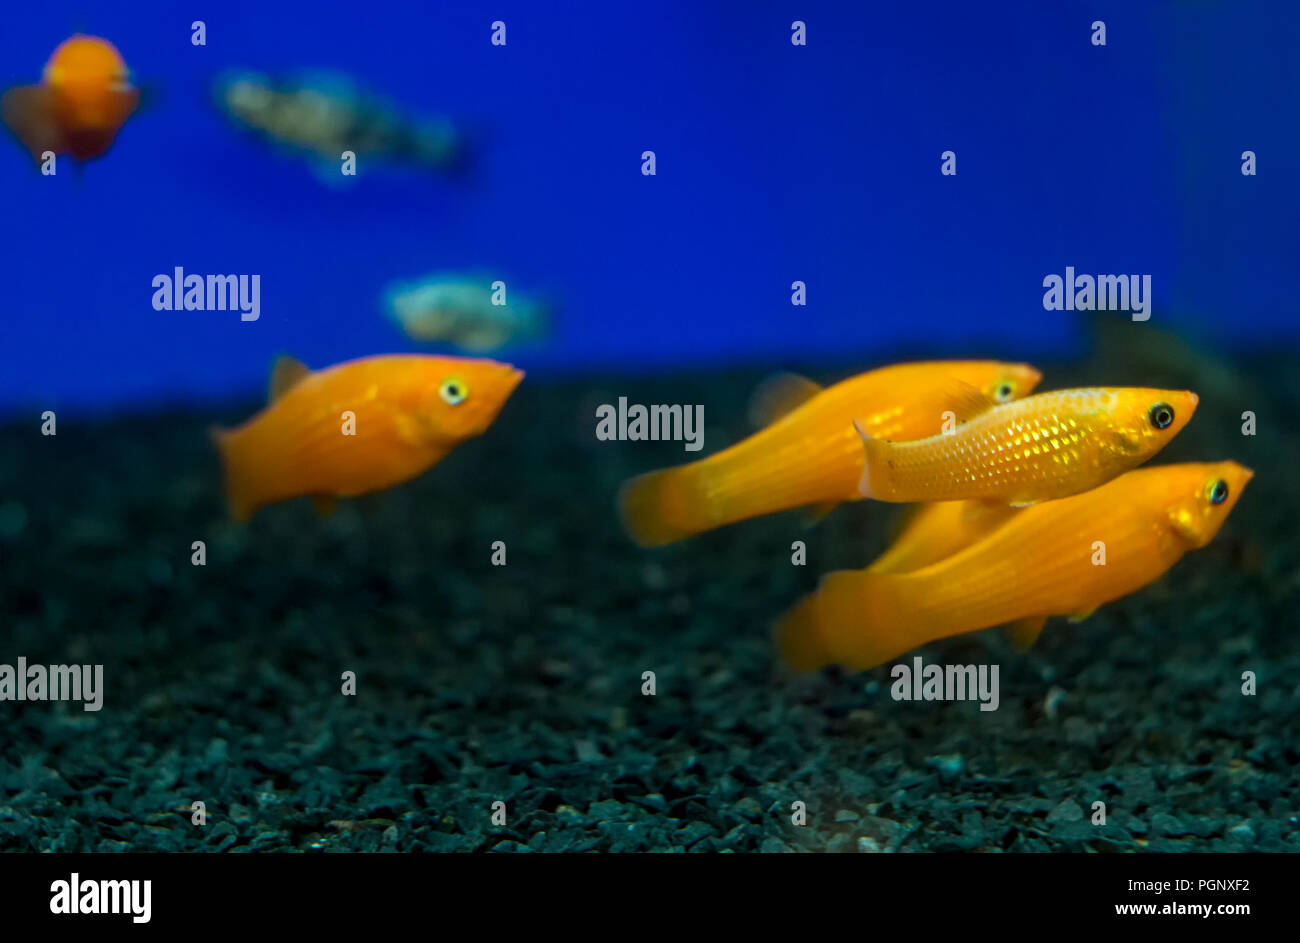 Colorful Gold, Yellow Molly Poecilia sphenops aquarium fishes. Shallow dof. Poecilia sphenops is a species of fish, of the genus Poecilia, known under Stock Photo